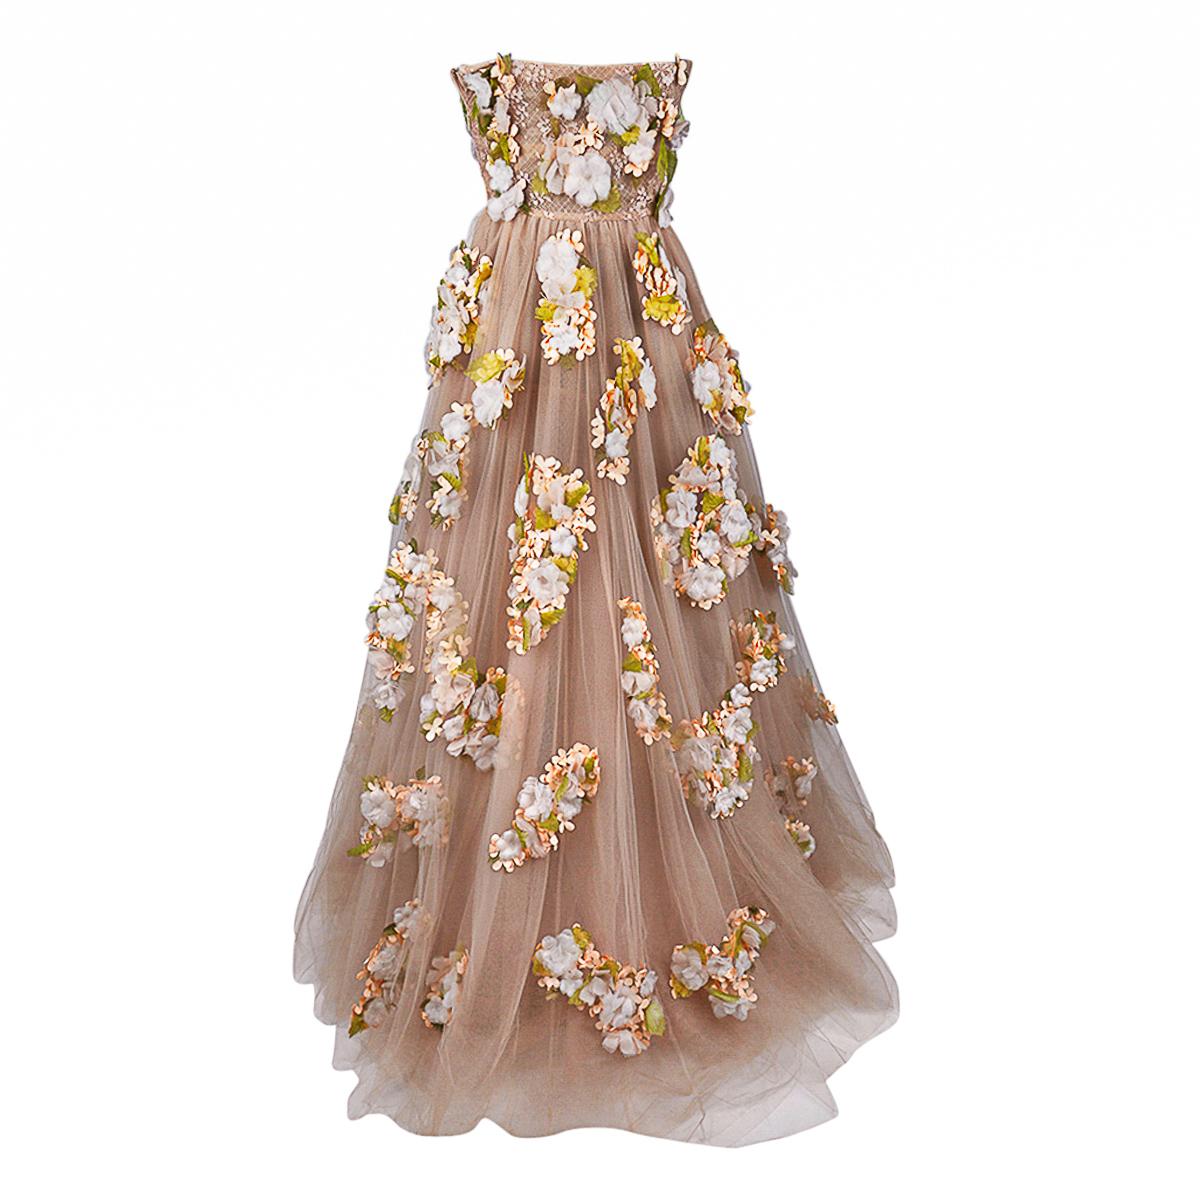 Valentino Strapless Empire Nude Flower Adorned Gown 1 of 2 Size 0 For Sale 12